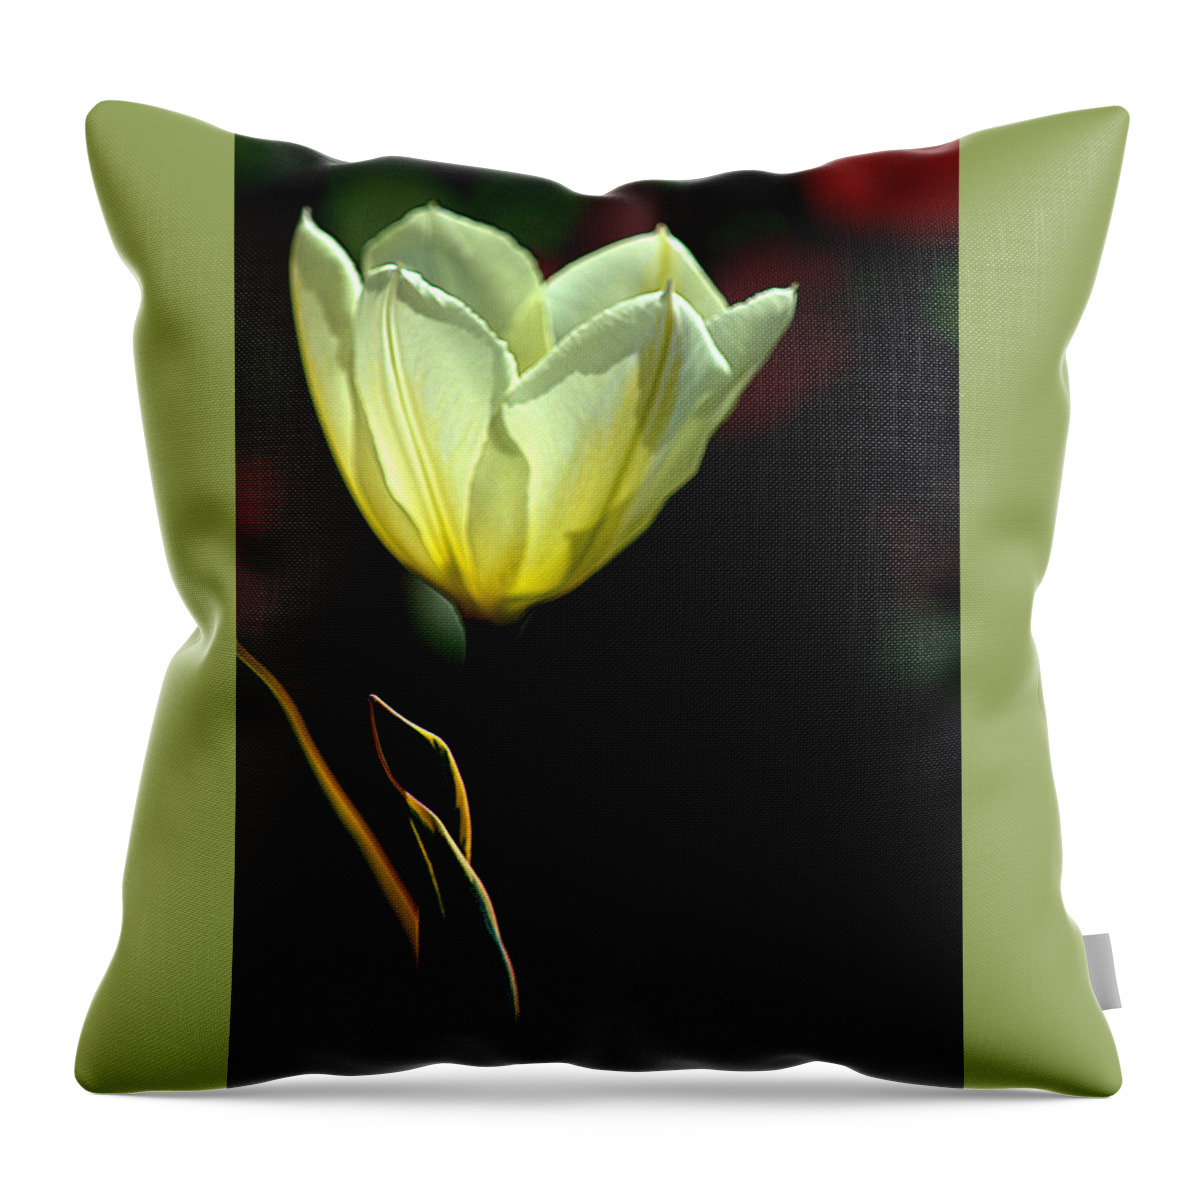 Art Throw Pillow featuring the photograph Light Yellow Tulip by Joan Han